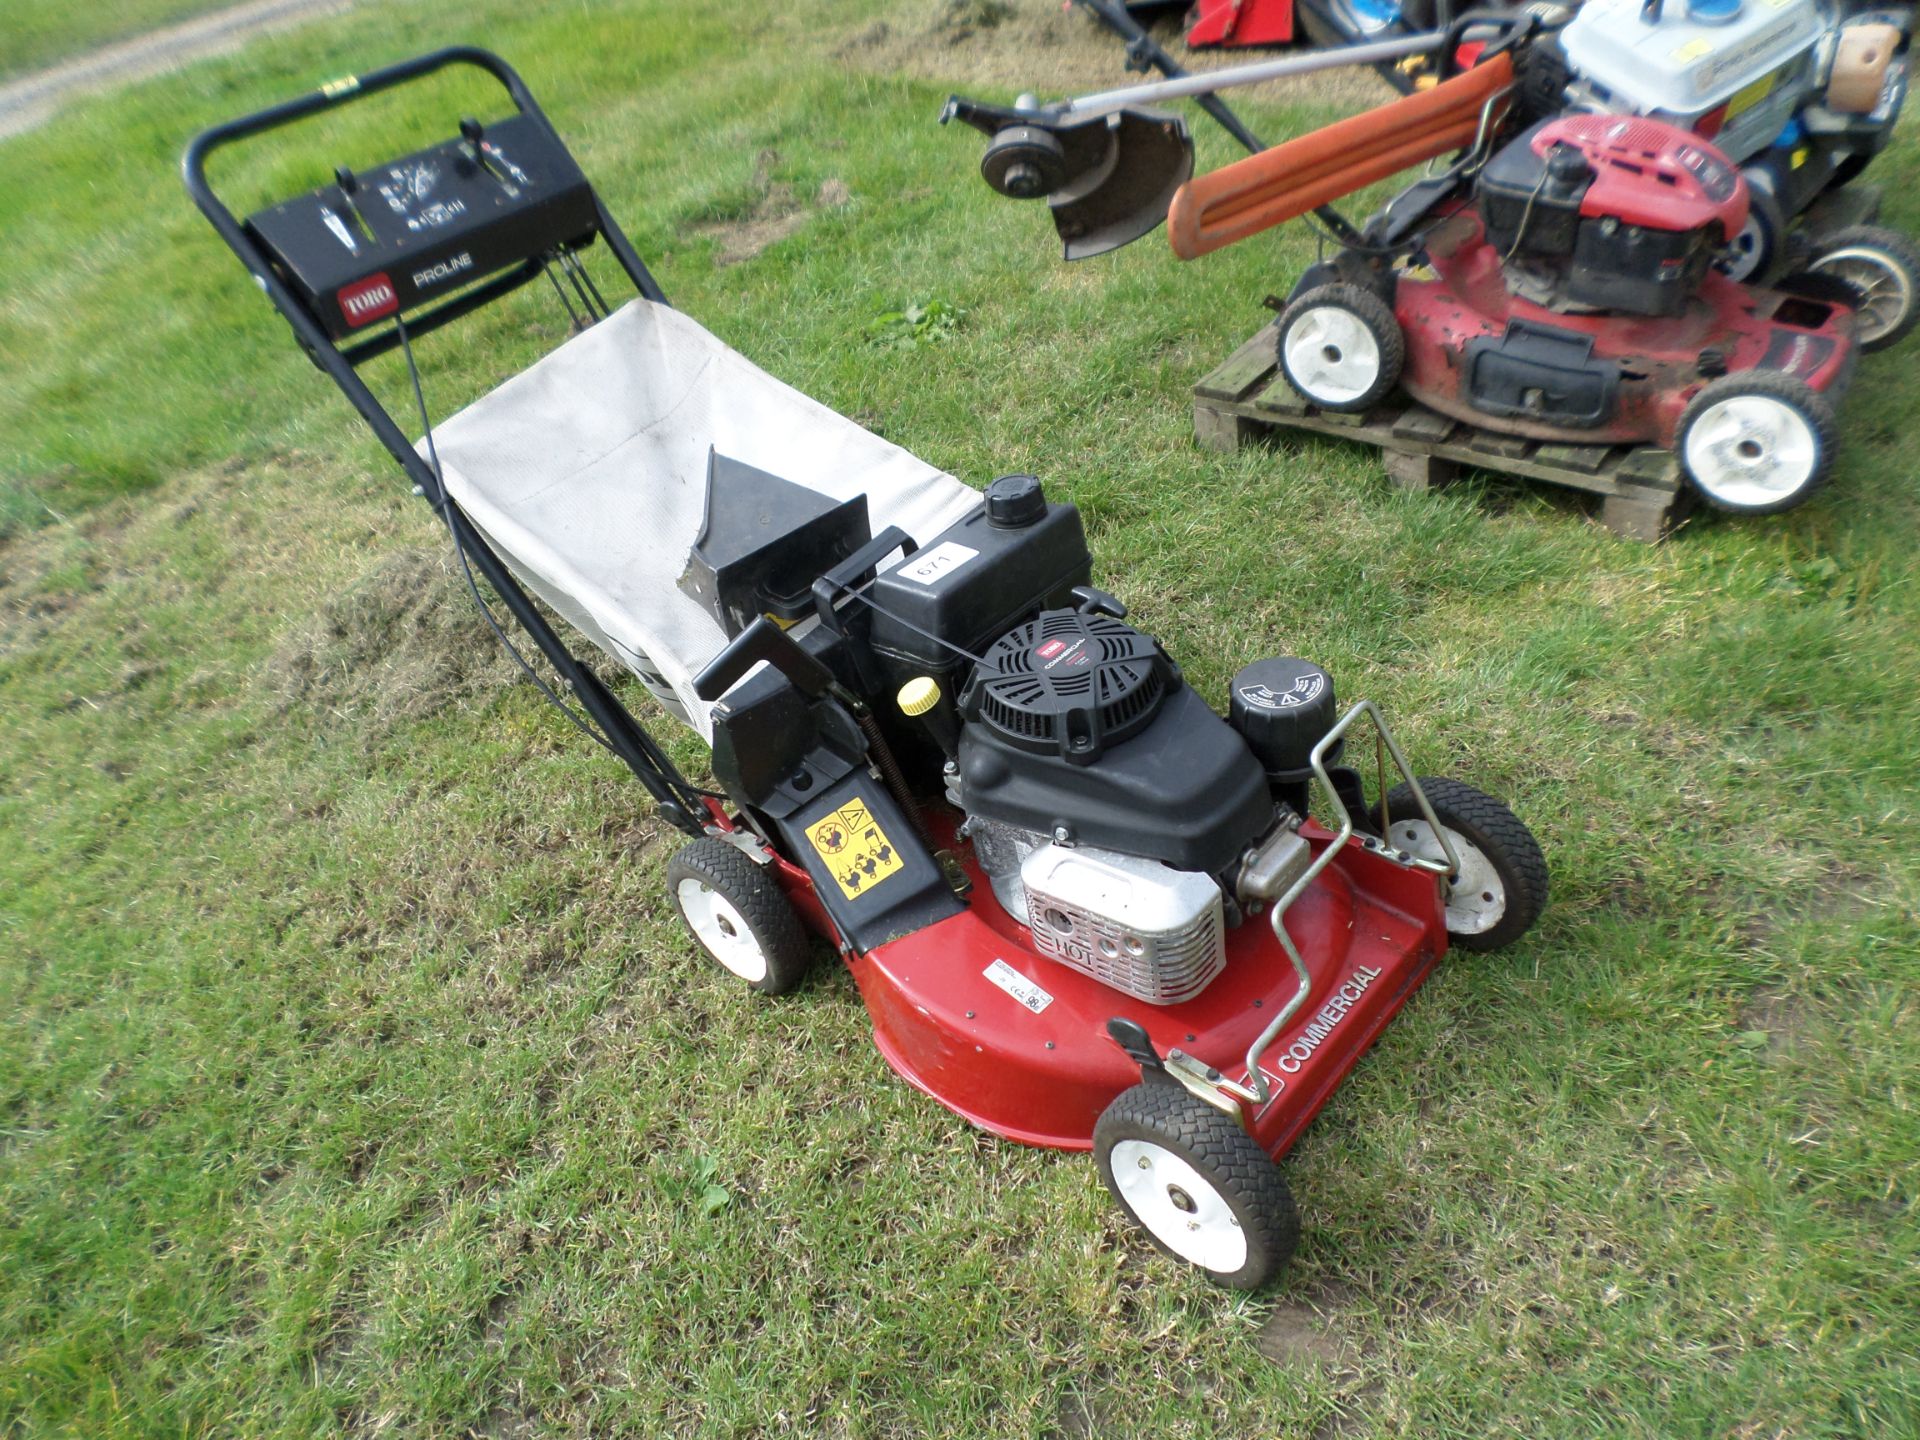 Toro Pro Line commercial self propelled 3 speed rotary mower with mulching plug and grass bag